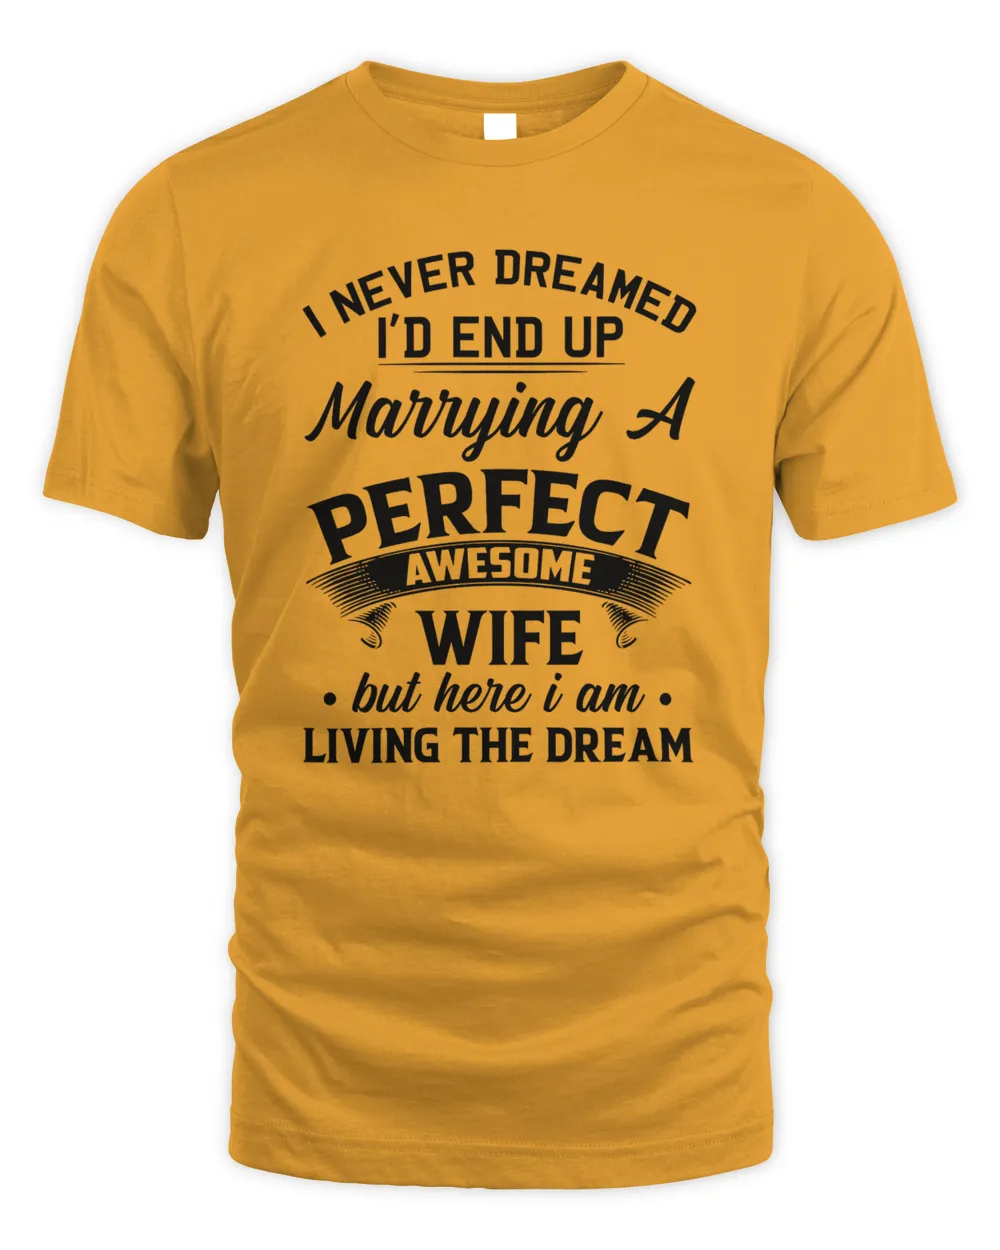 Marrying A Perfect Awesome Wife